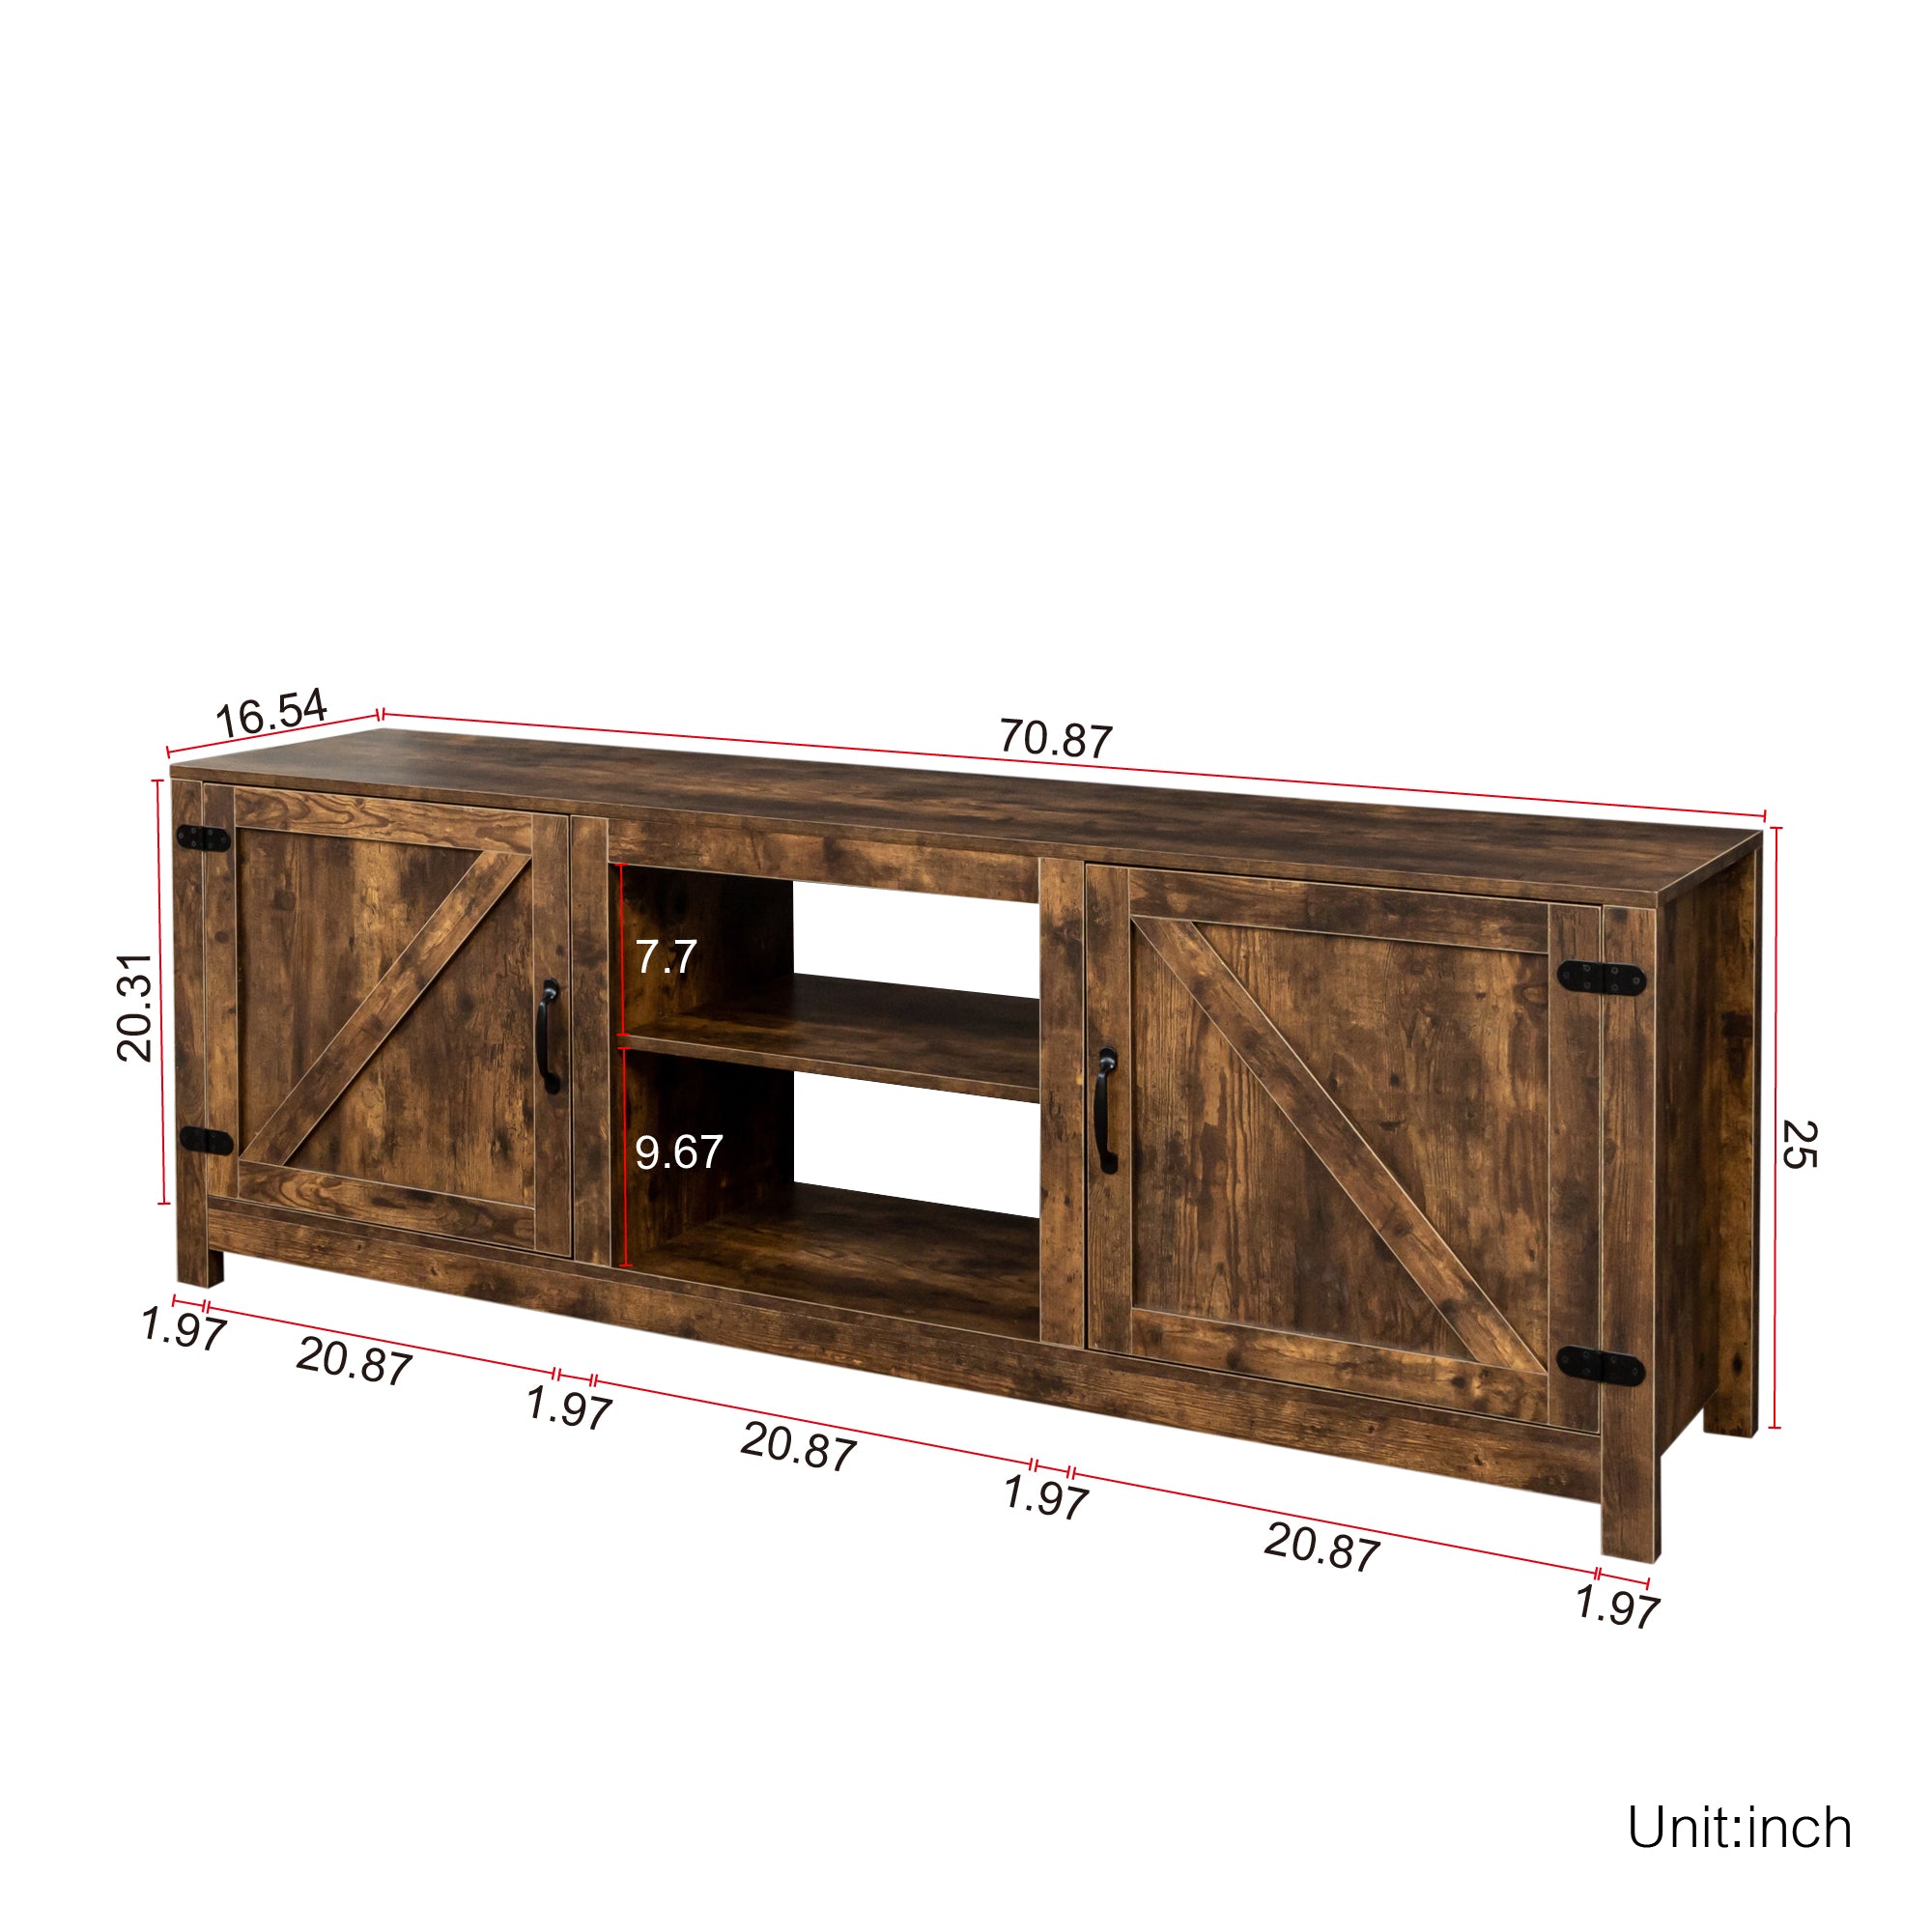 ZNTS Farmhouse TV Stand, Wood Entertainment Center Media Console with Storage W33154190